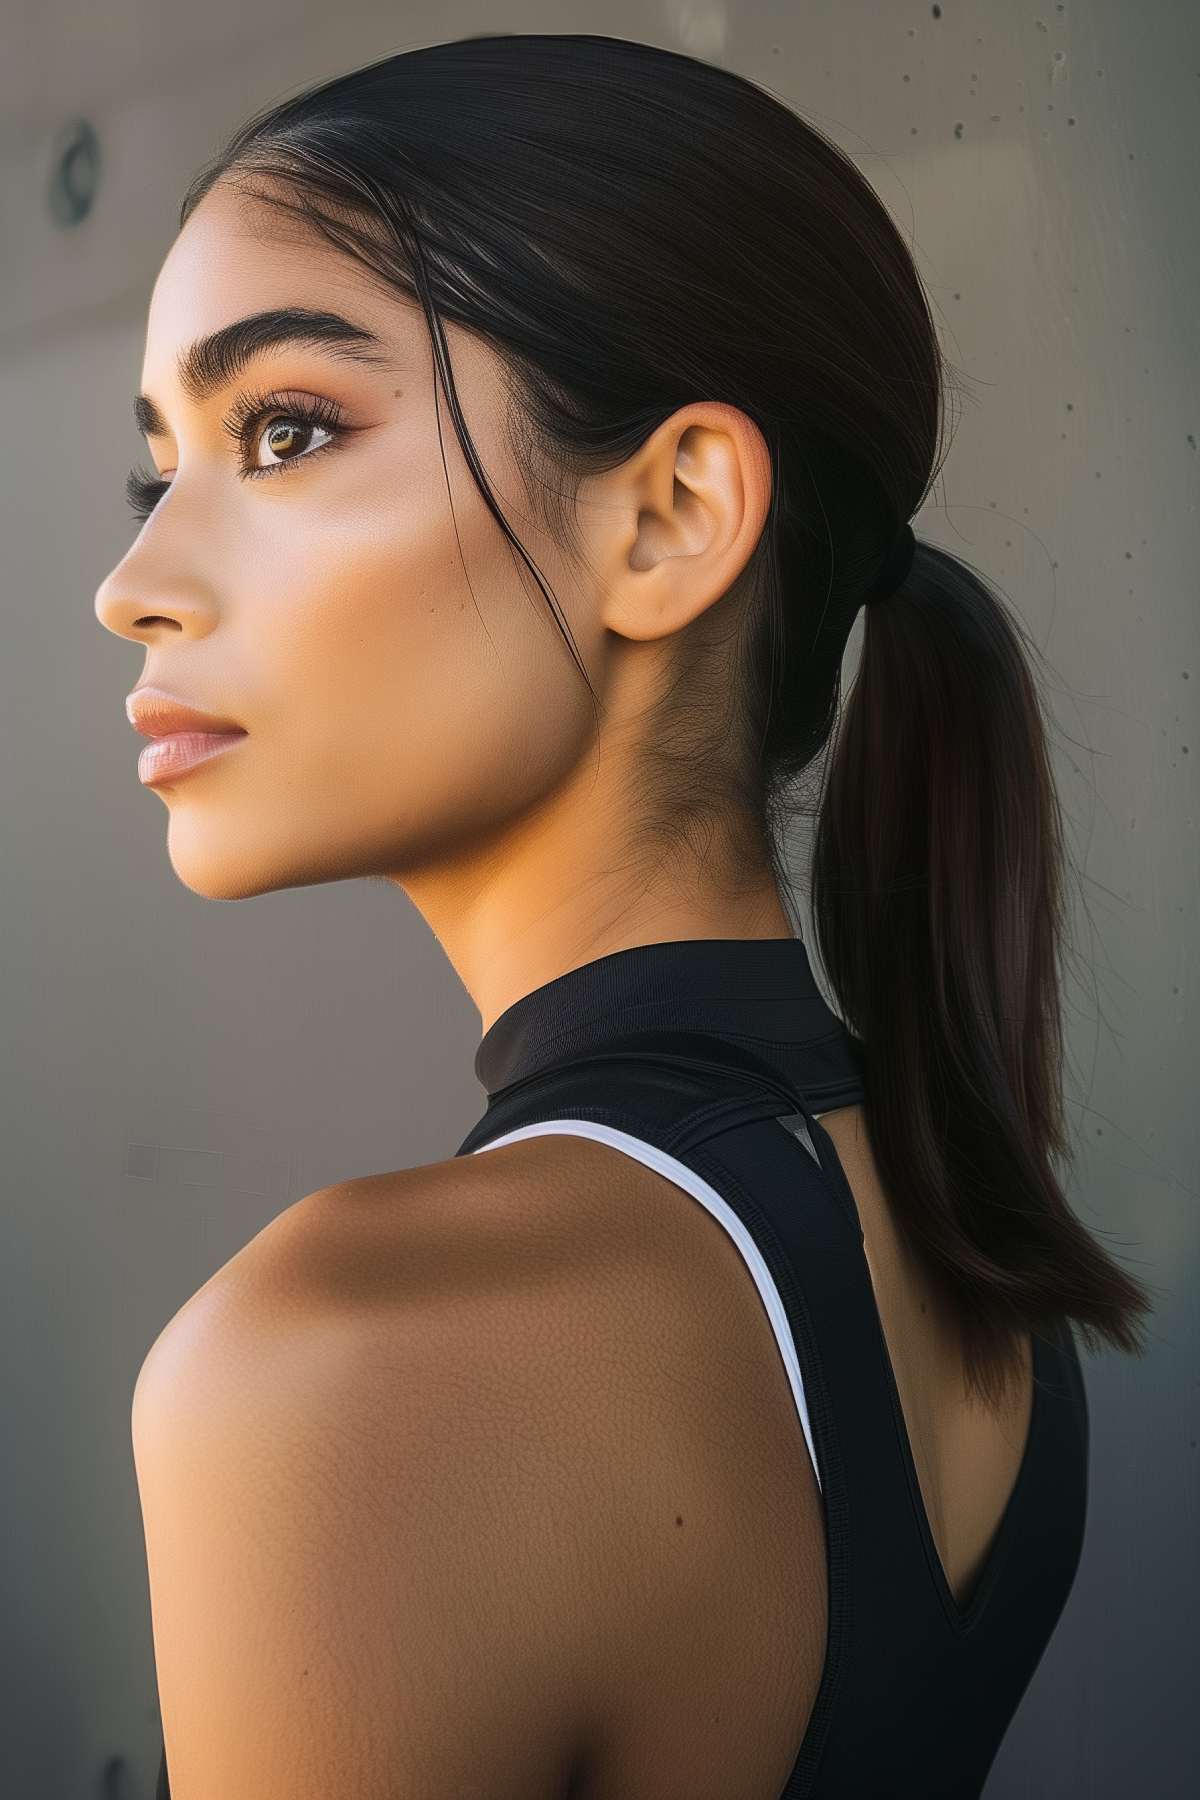 Woman with a sleek, low ponytail at the nape, ideal for a clean and stylish look suitable for both athletic and professional environments.